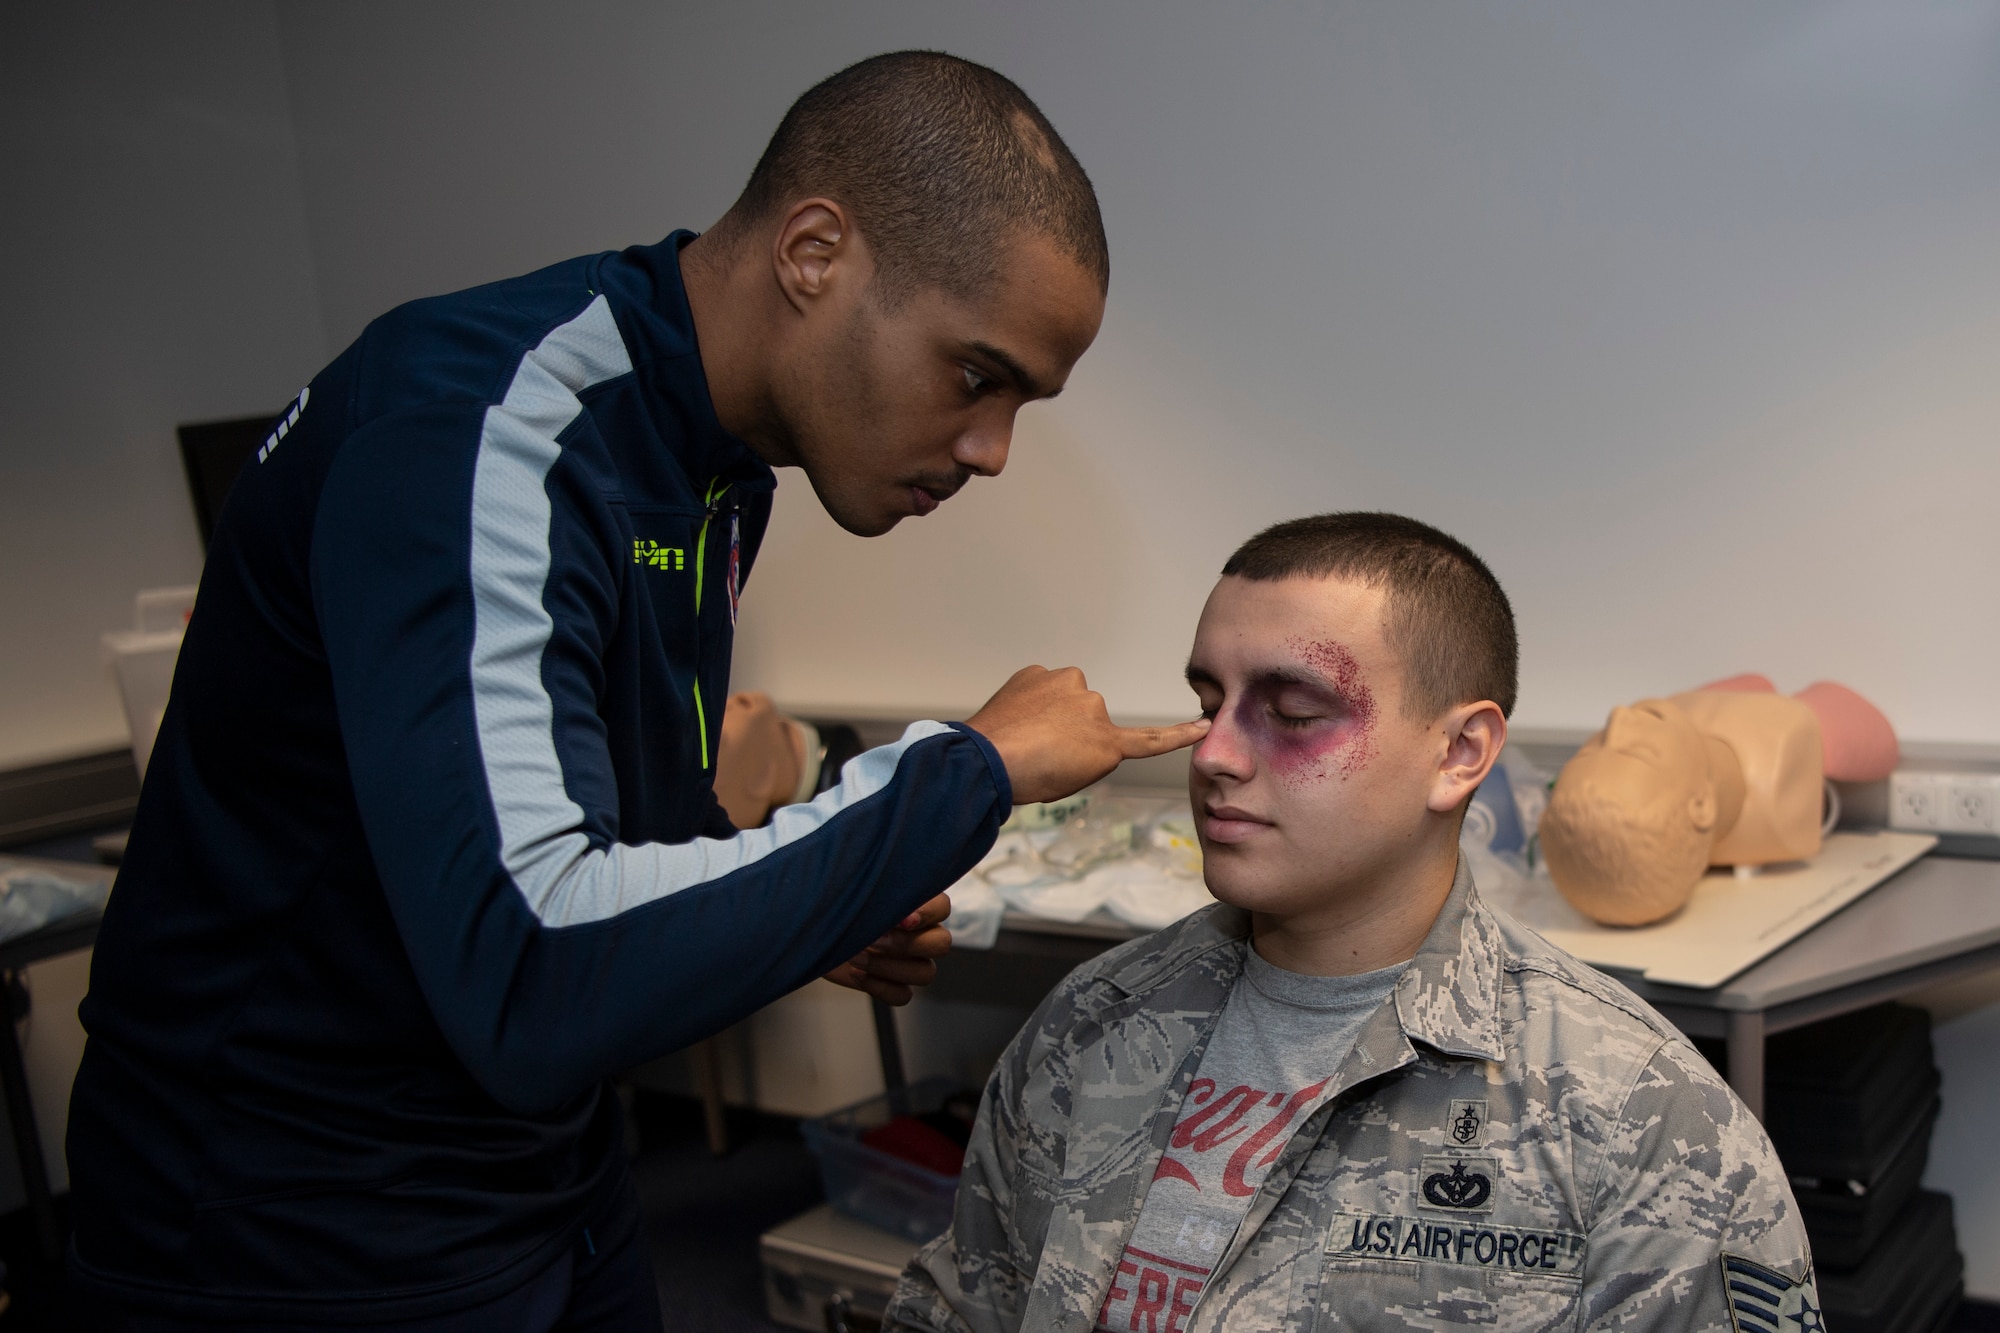 U.S. Air Force Staff Sgt. Nelson Pacheco, 52nd Medical Group public health technician, applies moulage to a simulated wounded victim’s face during exercise Sabre Storm, Nov. 3, 2021, on Spangdahlem Air Base, Germany. The moulage simulated injuries, enabling the 52nd MDG to put their readiness to the test. (U.S. Air Force photo by Staff Sgt. Melody W. Howley)